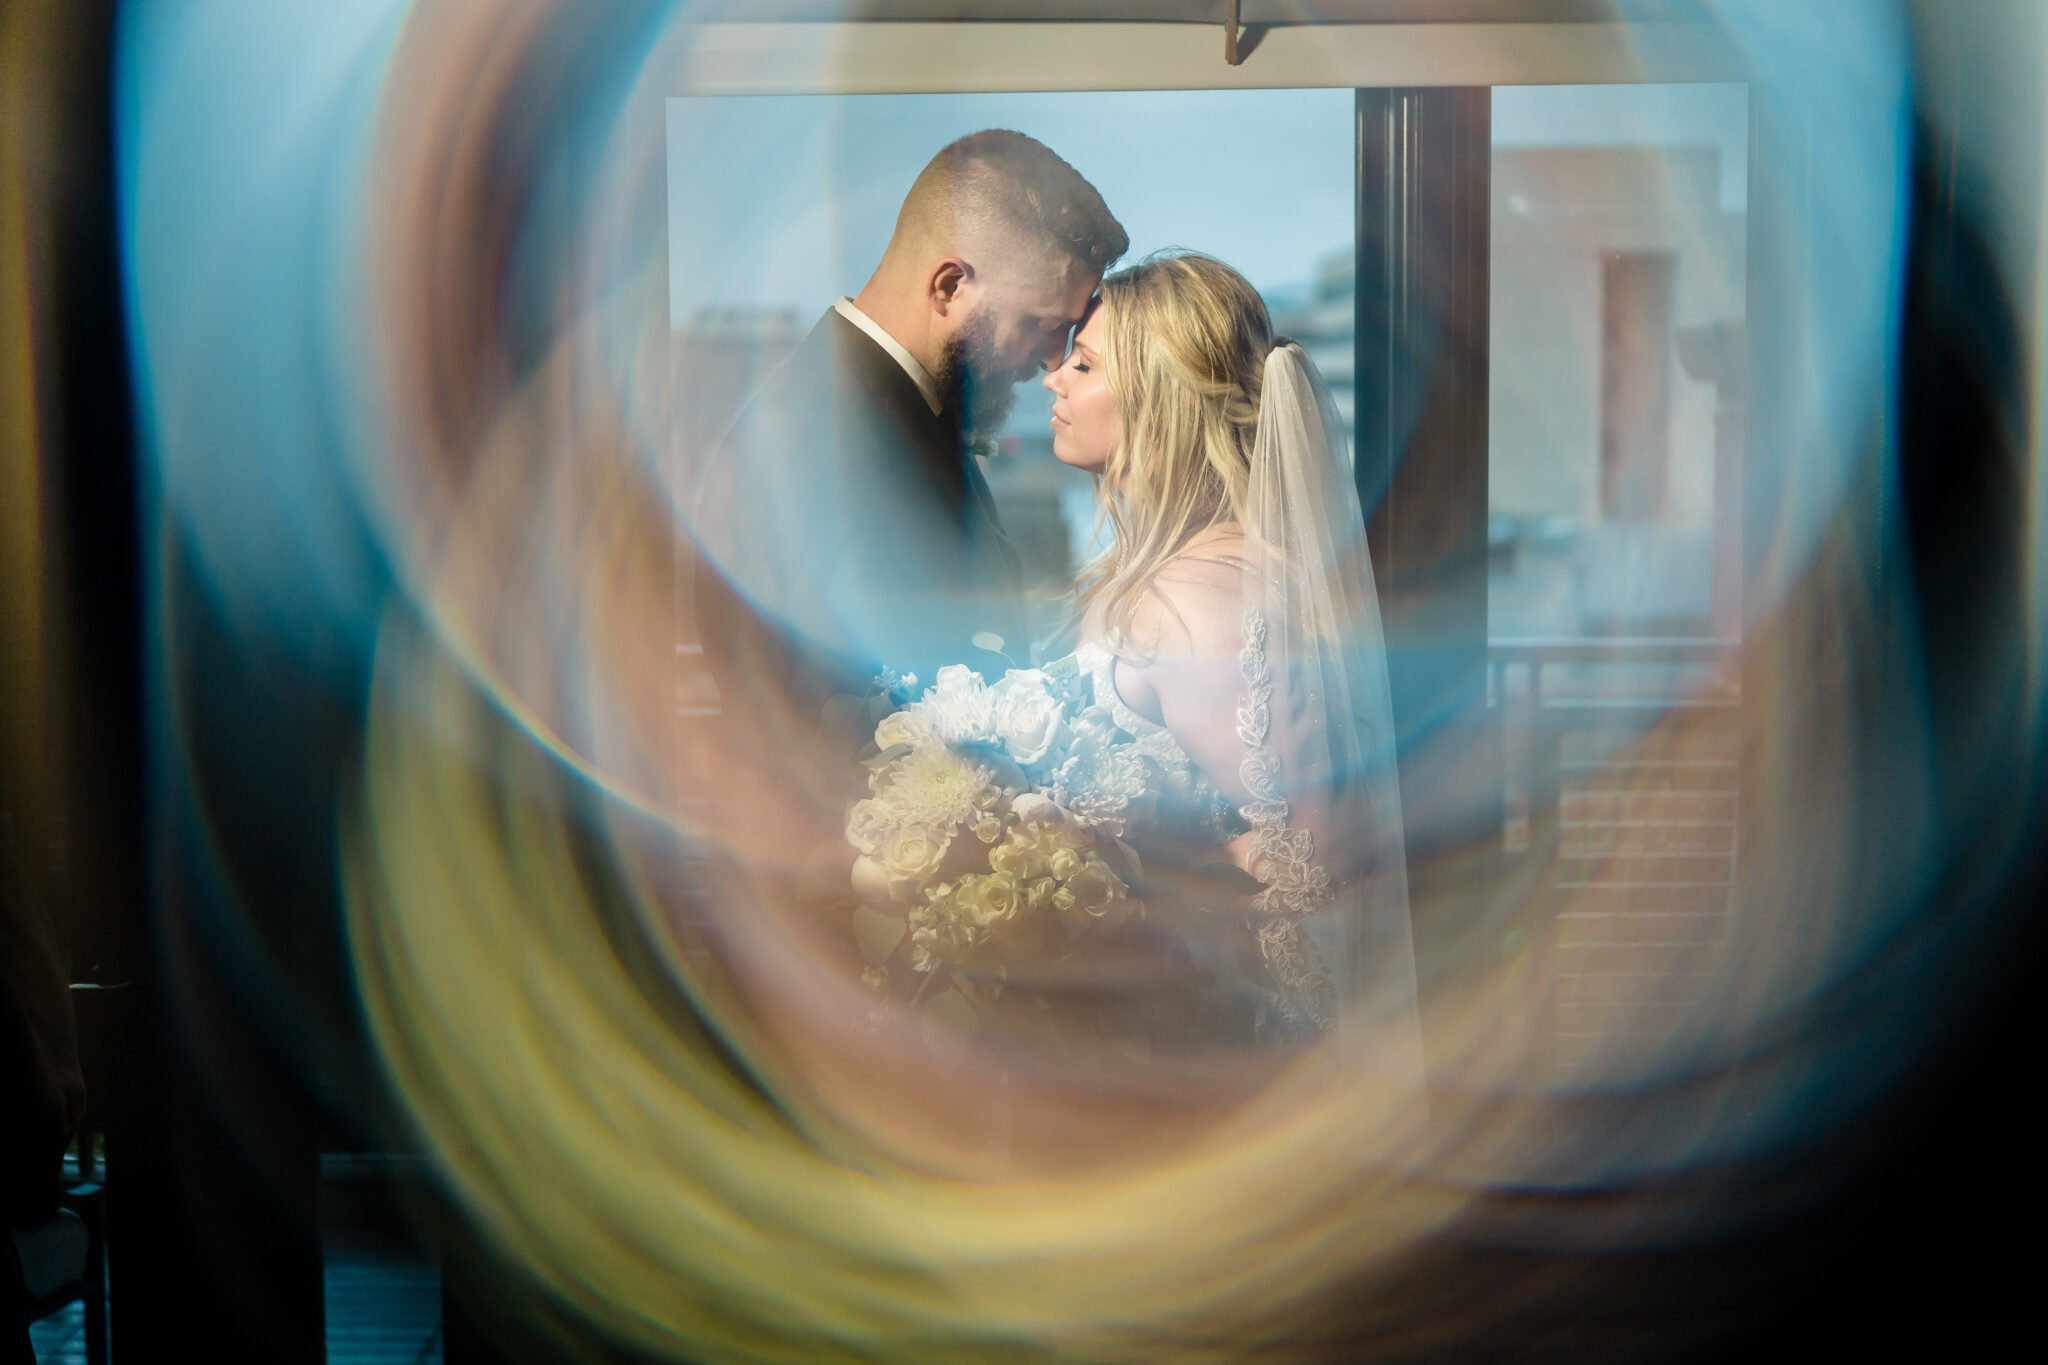 A bride and groom standing in front of a mirror.